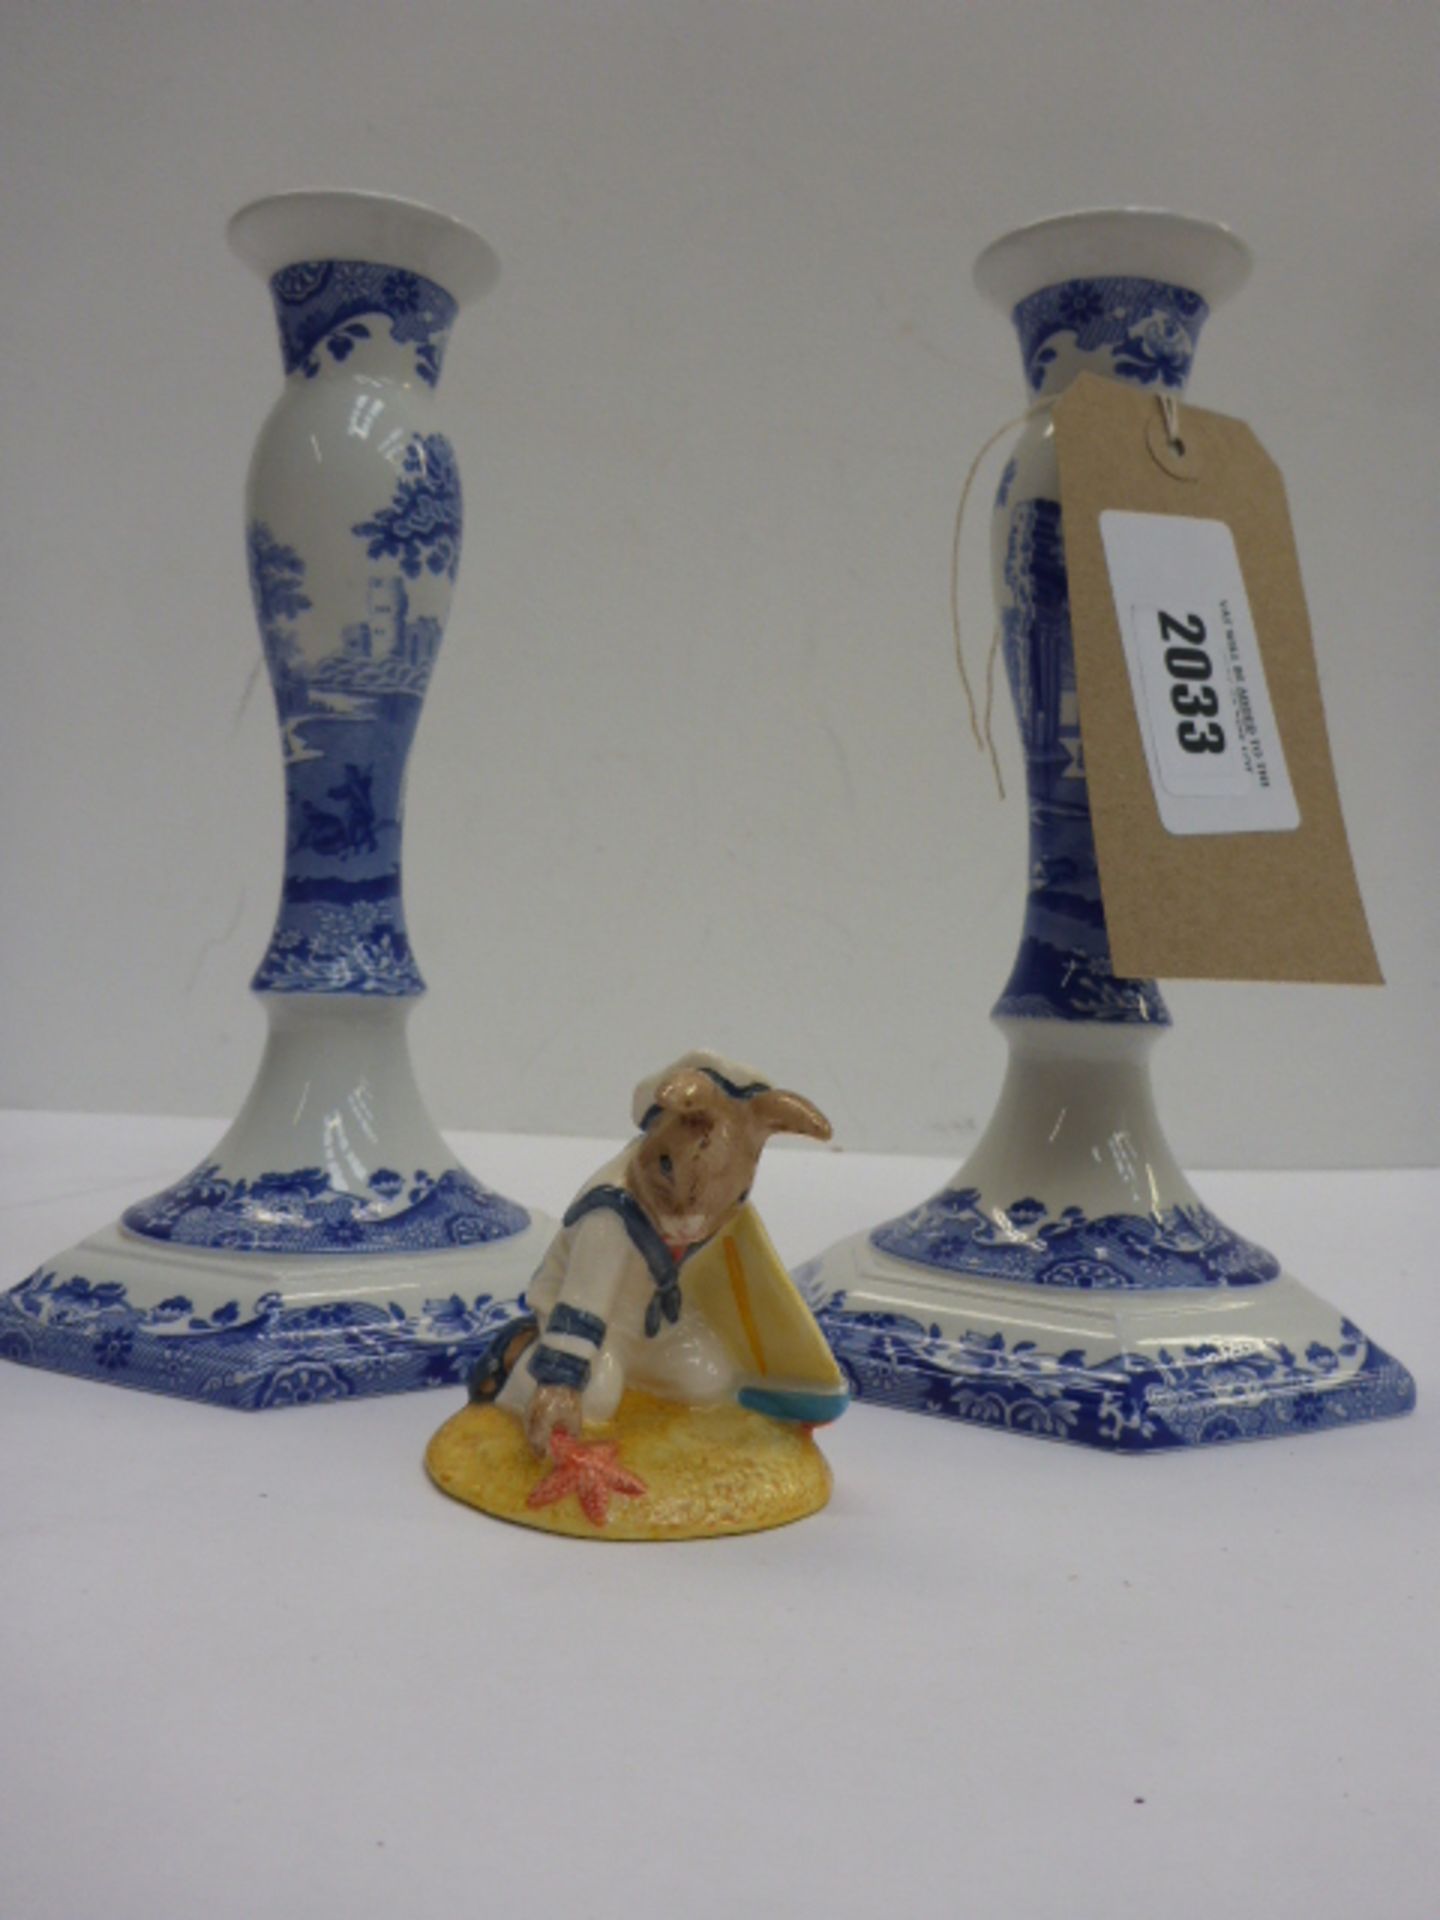 Pair of Spode 1816 blue and white candle holders and Royal Doulton Sailor Bunnykins figure